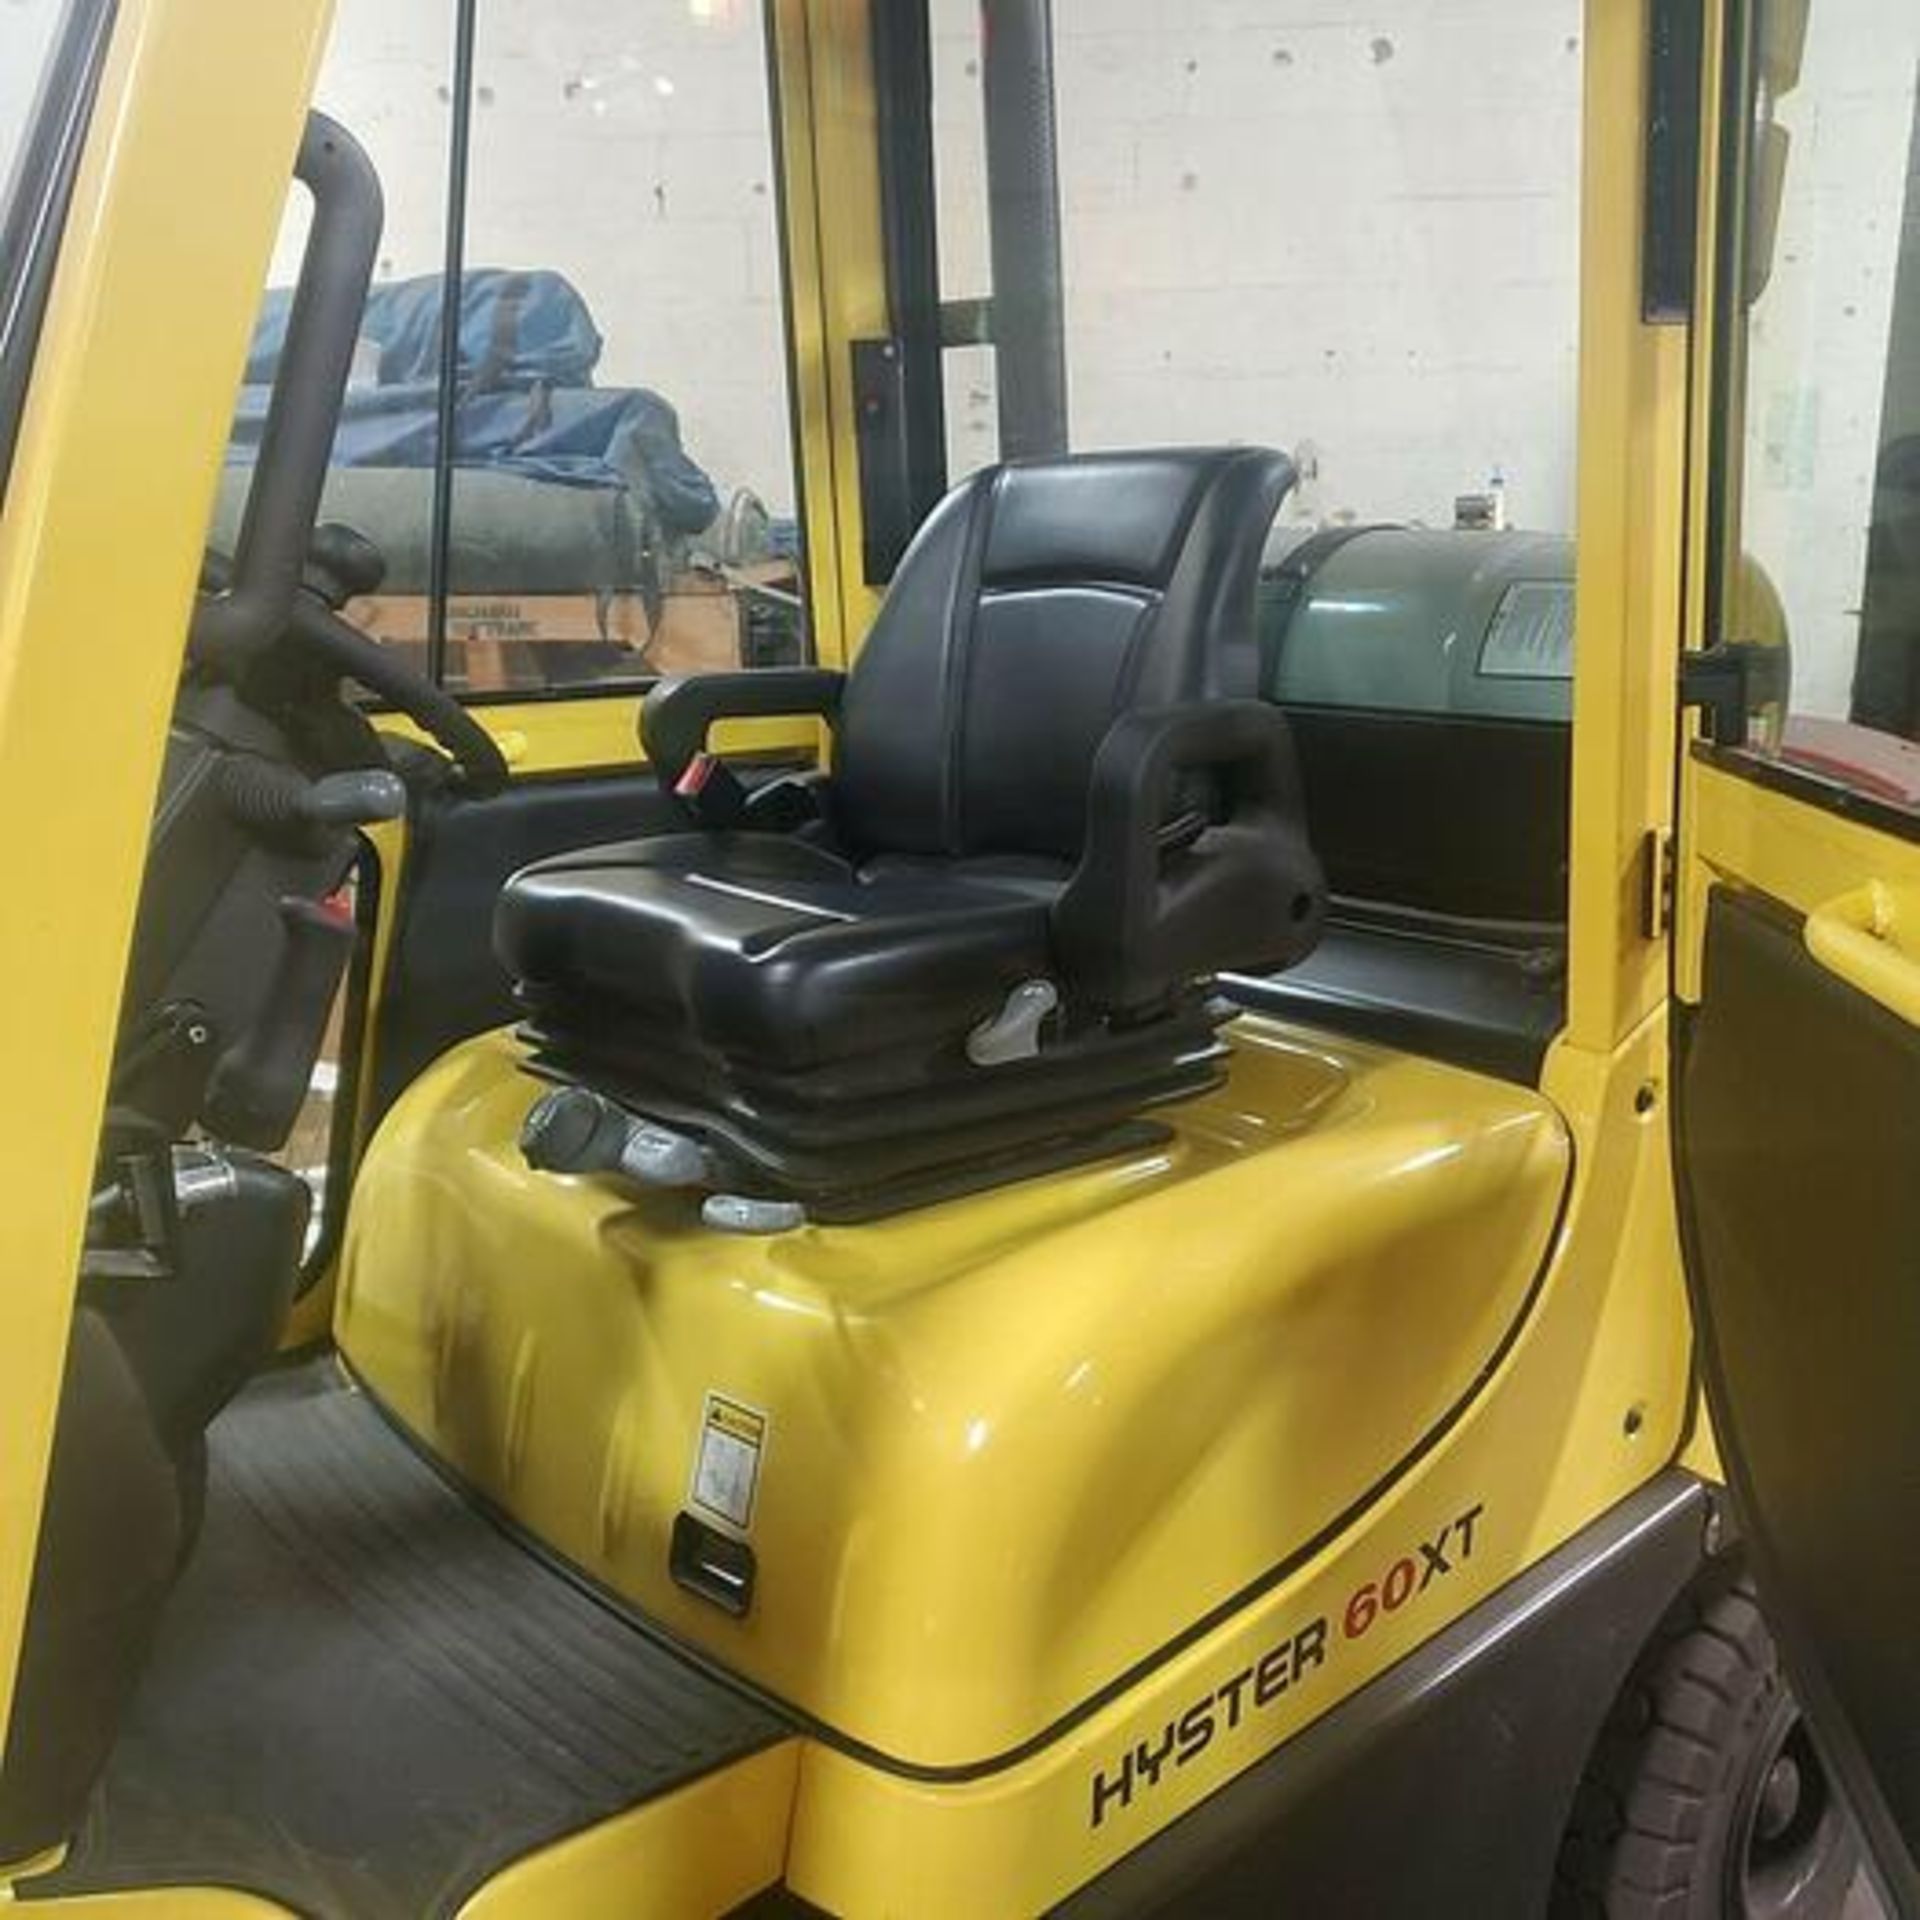 6,000 POUND HYSTER MODEL 60XT PNEUMATIC TIRE FORKLIFT - Image 2 of 8